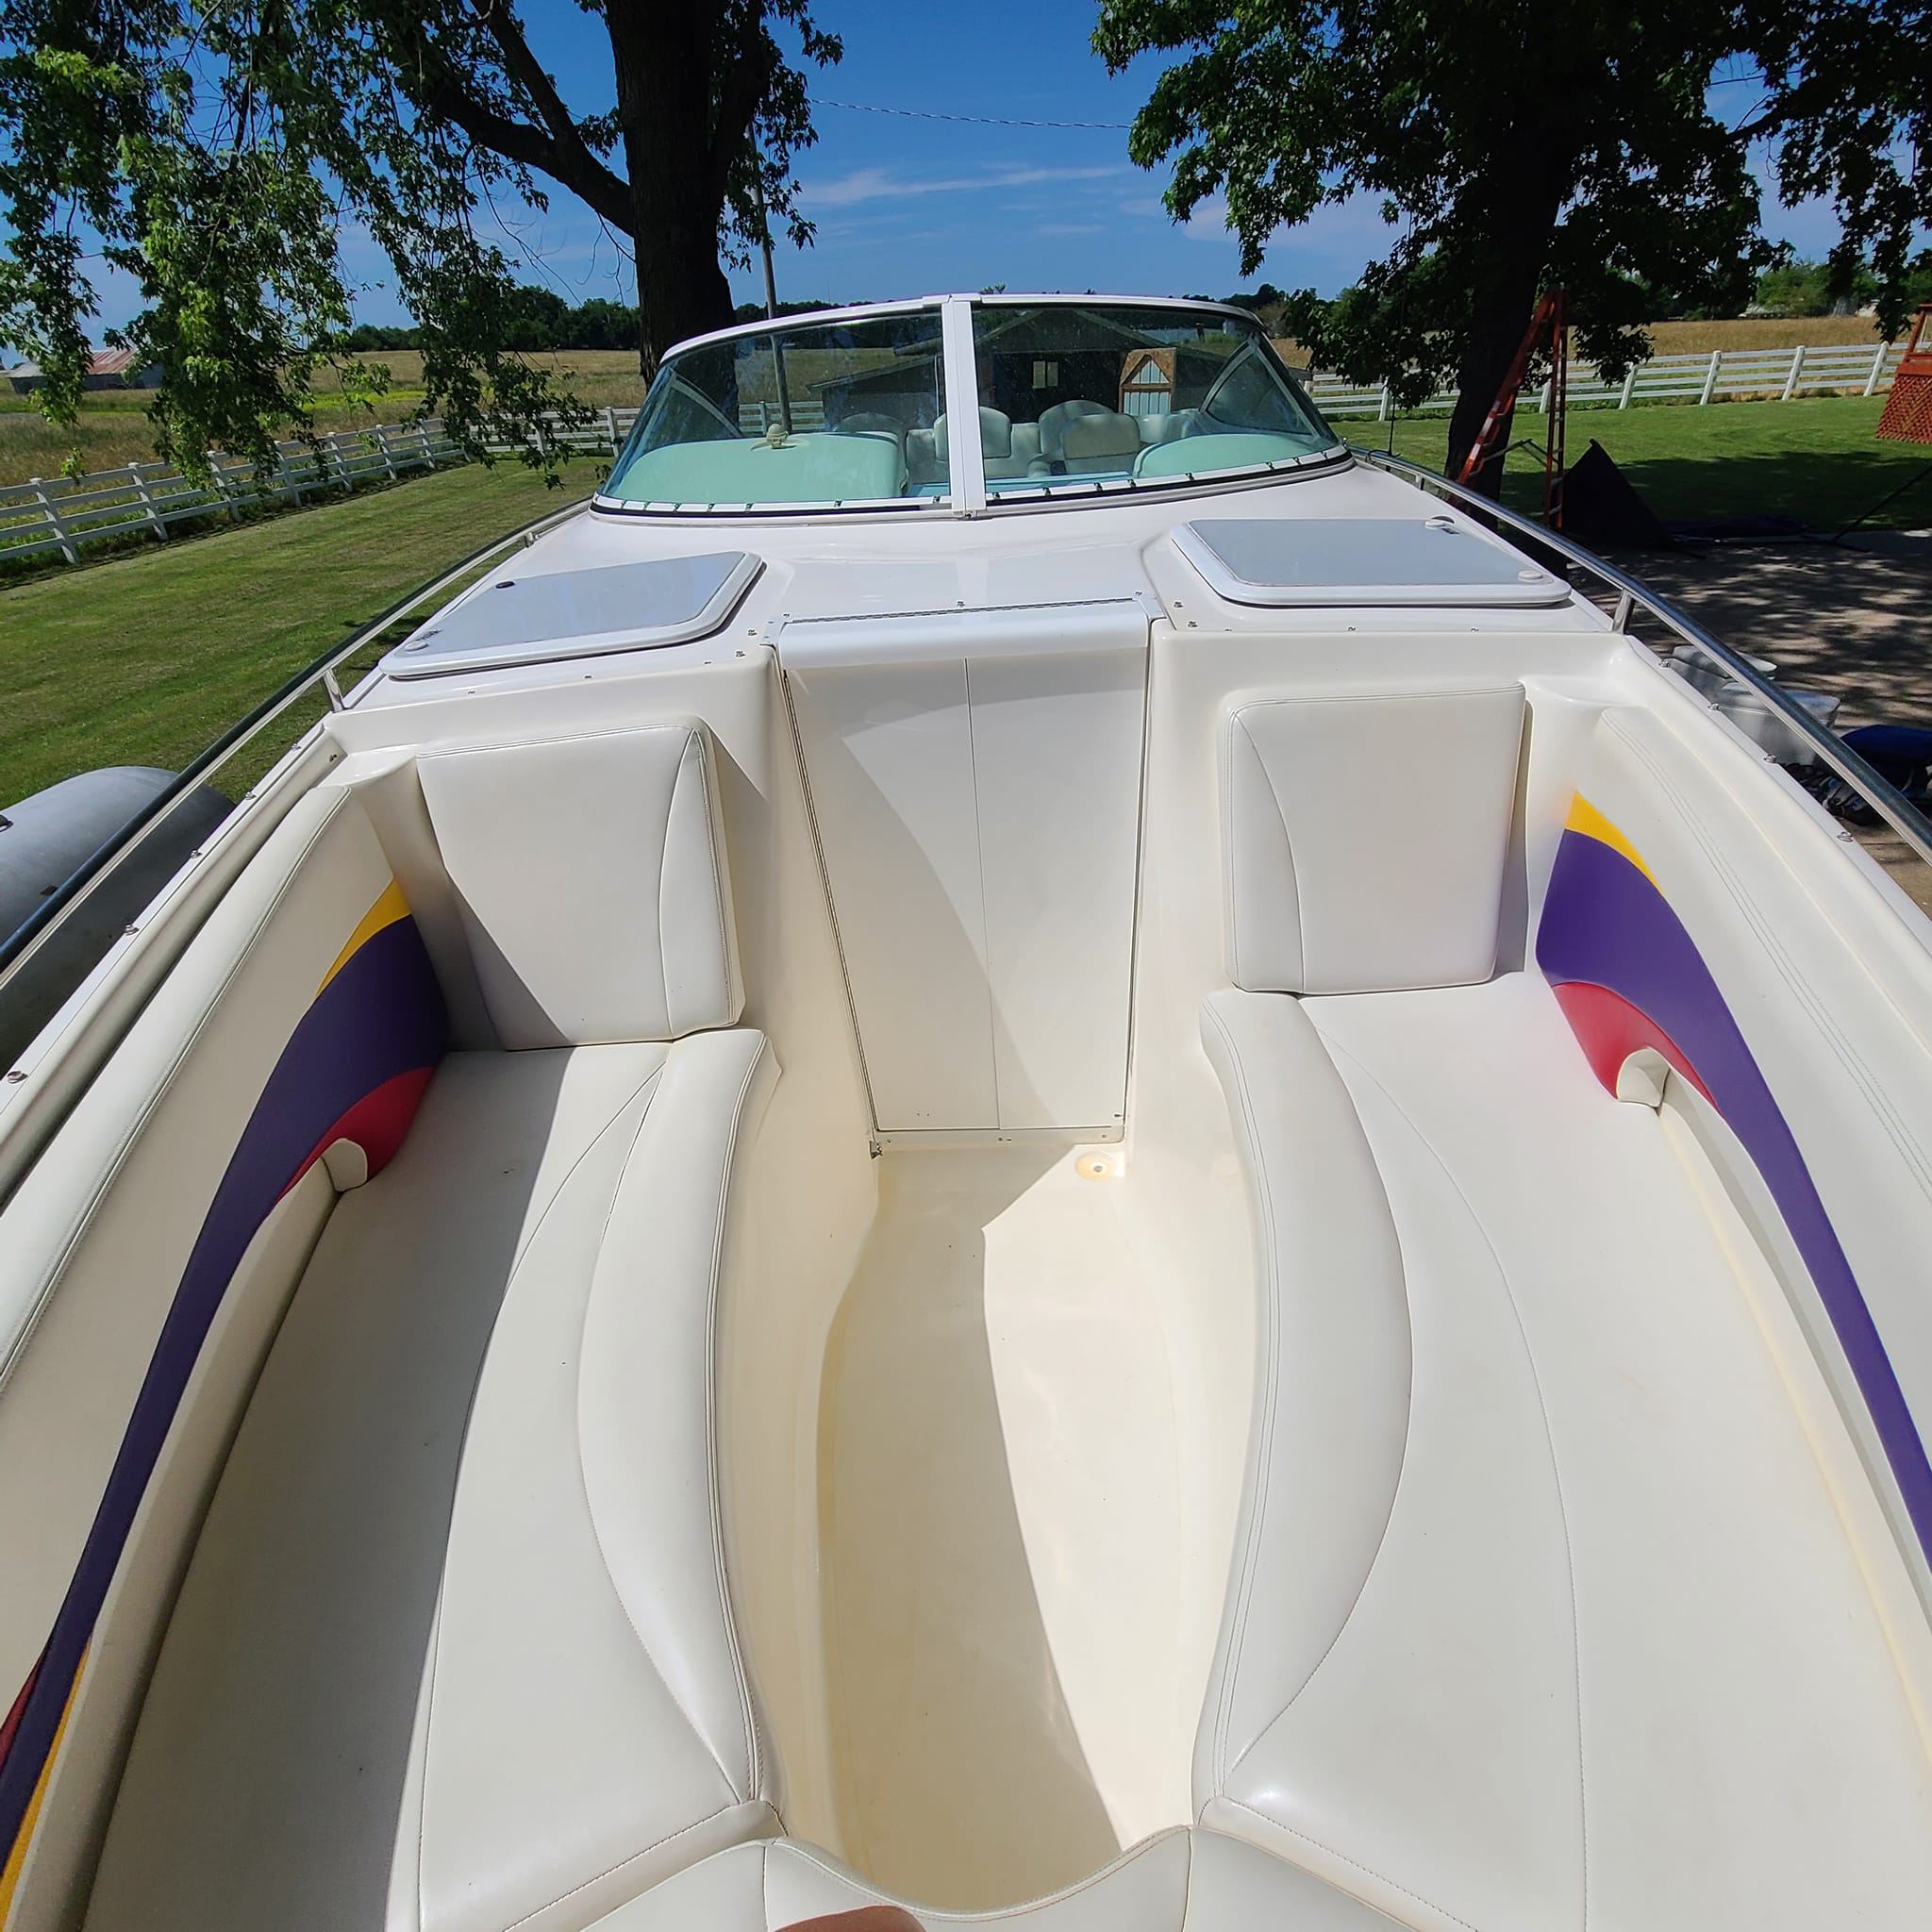 2000 Baja Mach 1 Power boat for sale in Purdy, MO - image 7 